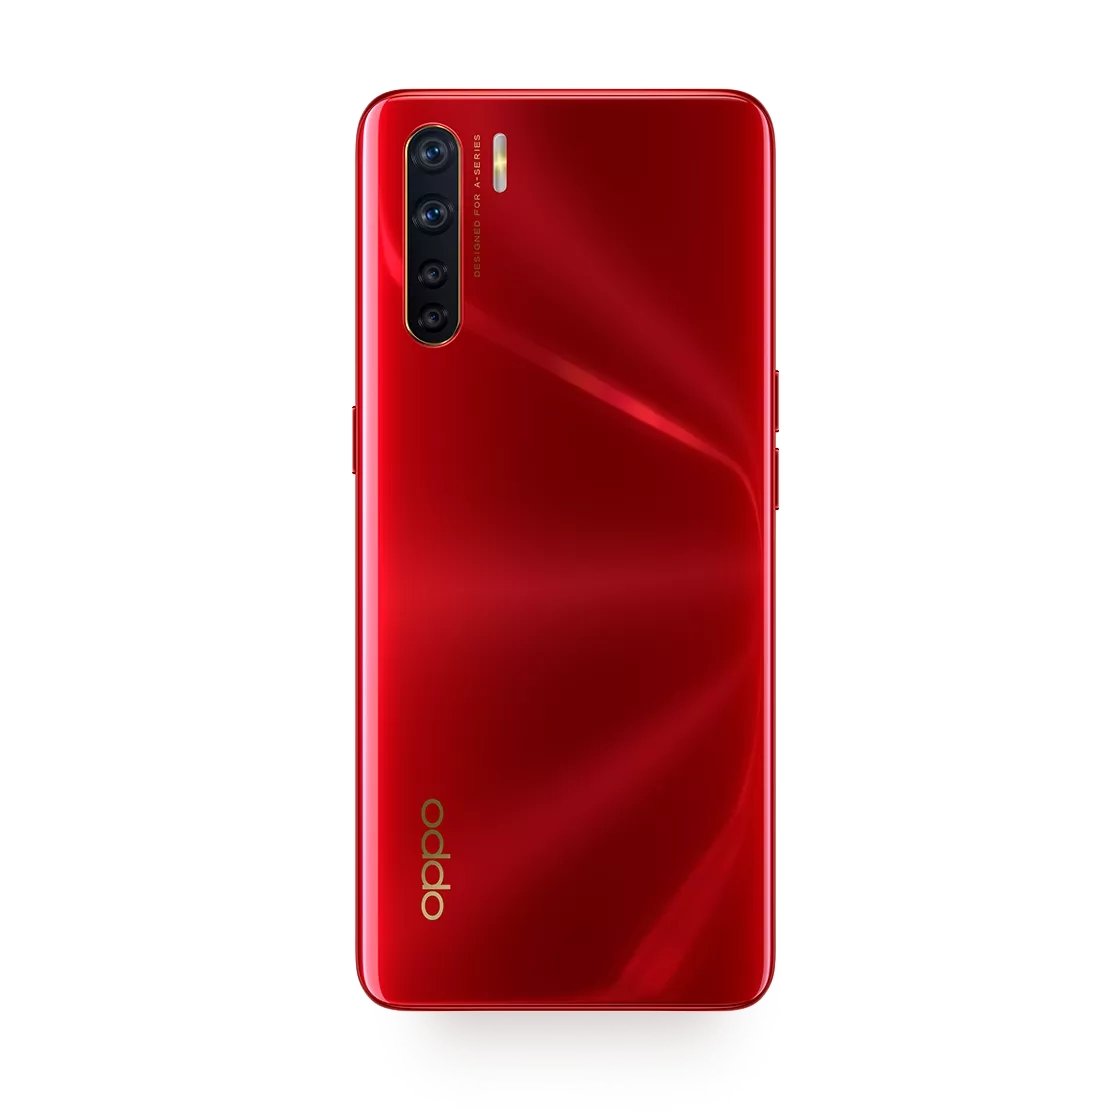 Oppo A91 review